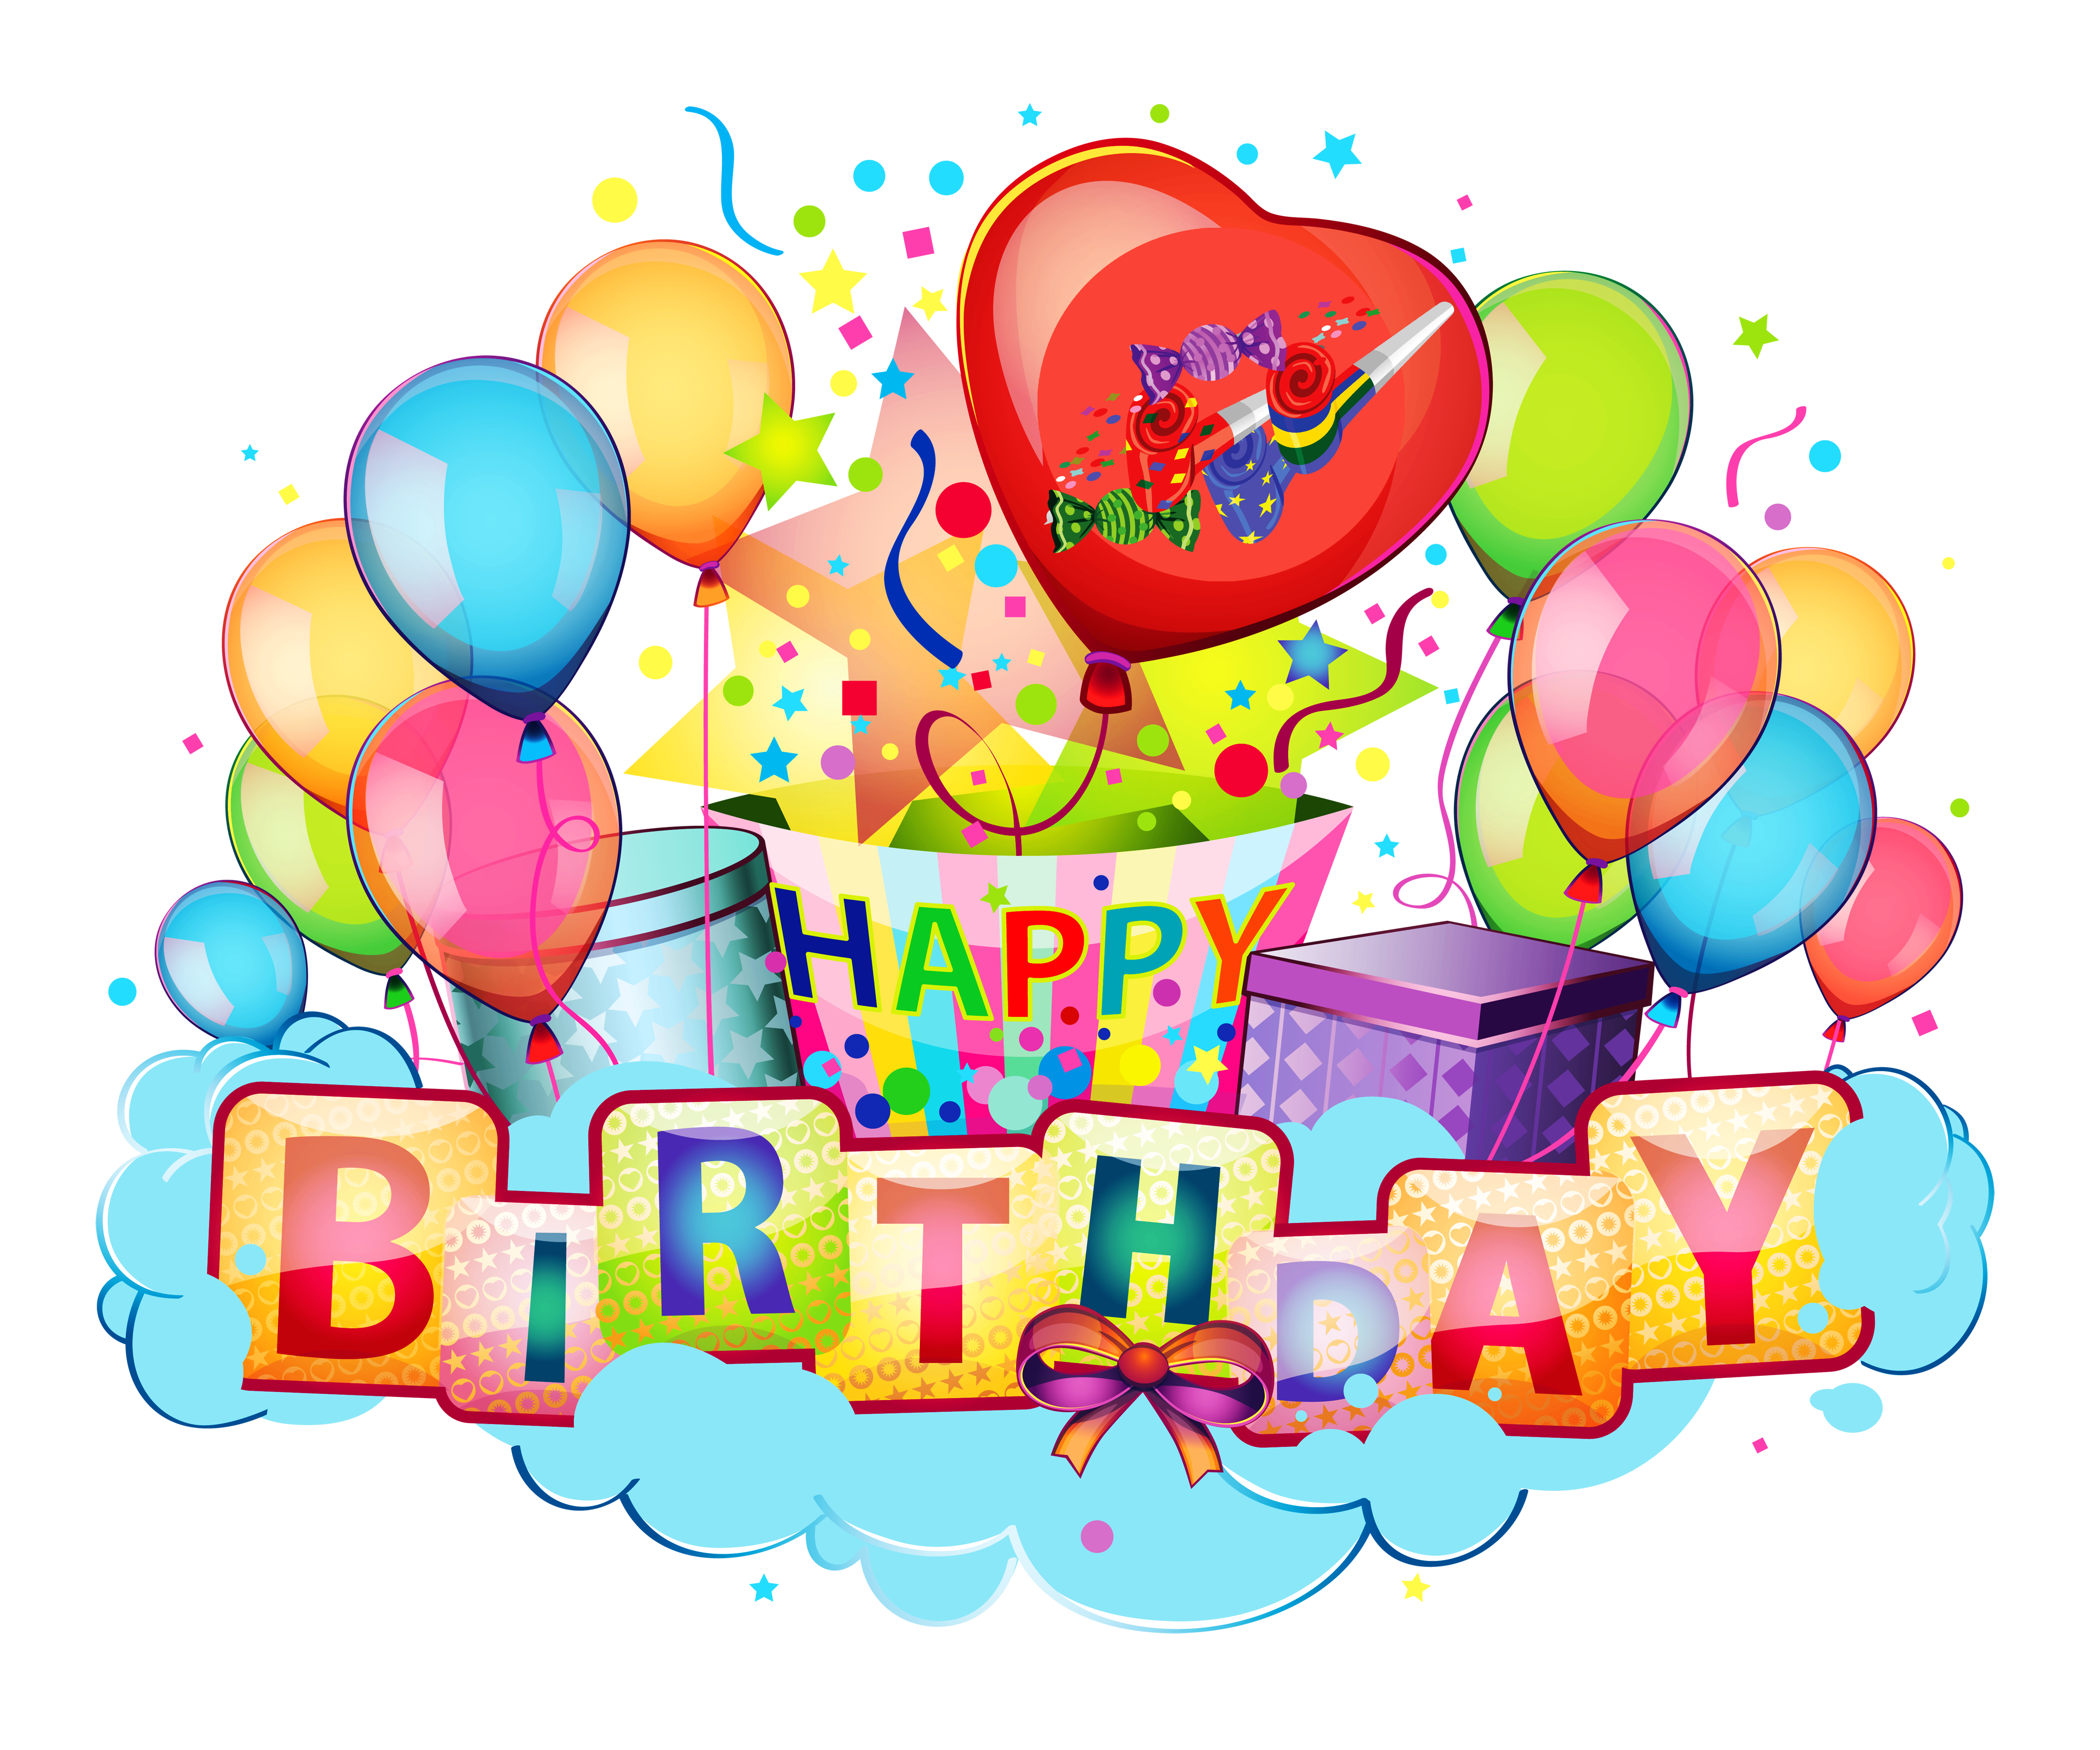 Prize clipart happy birthday. Decor transparent picture gallery